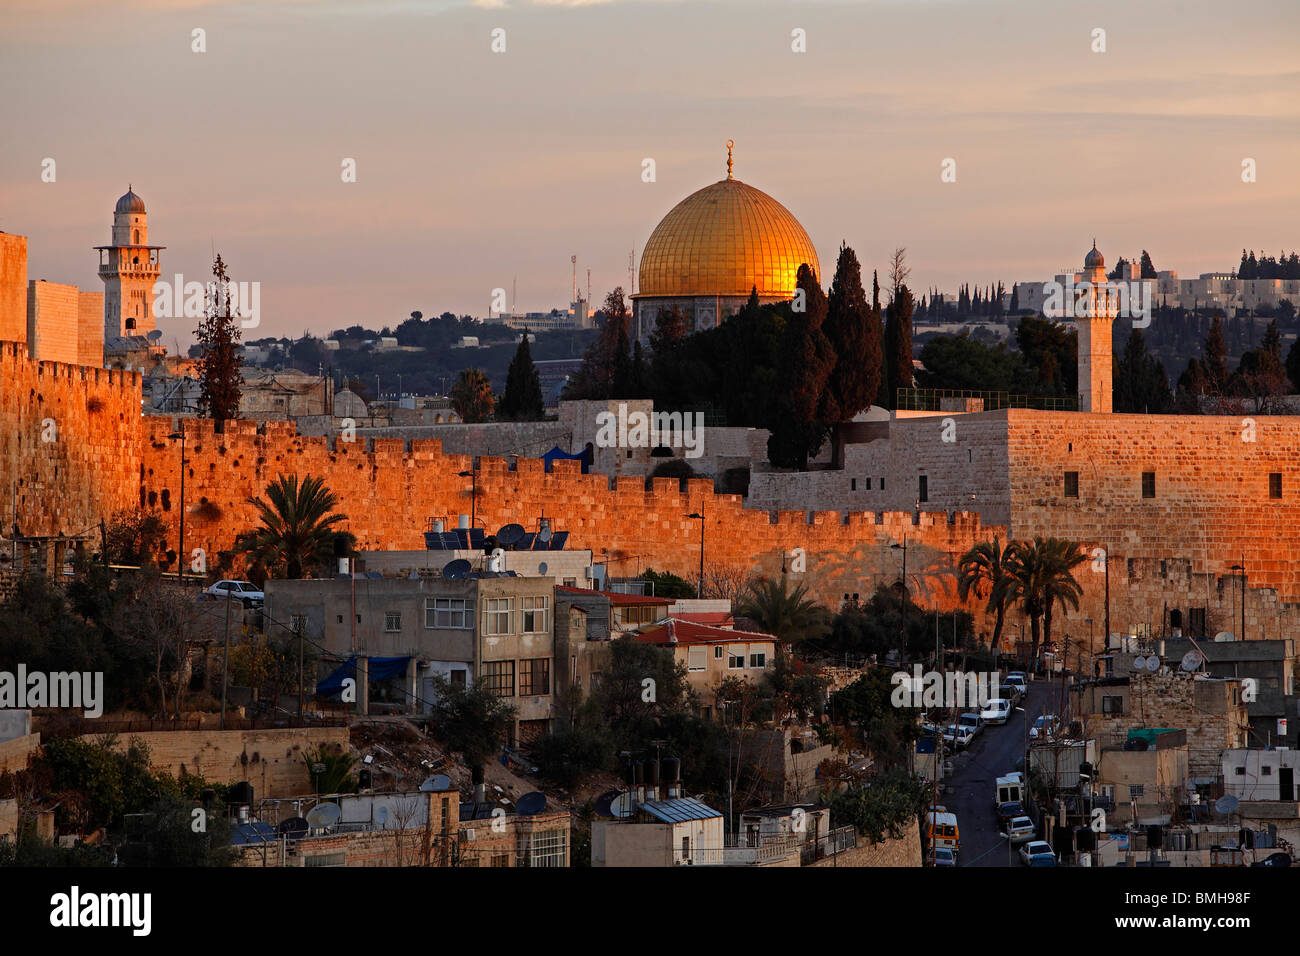 Israel,Jerusalem,Old City Wall,Dome of the Rock Stock Photo